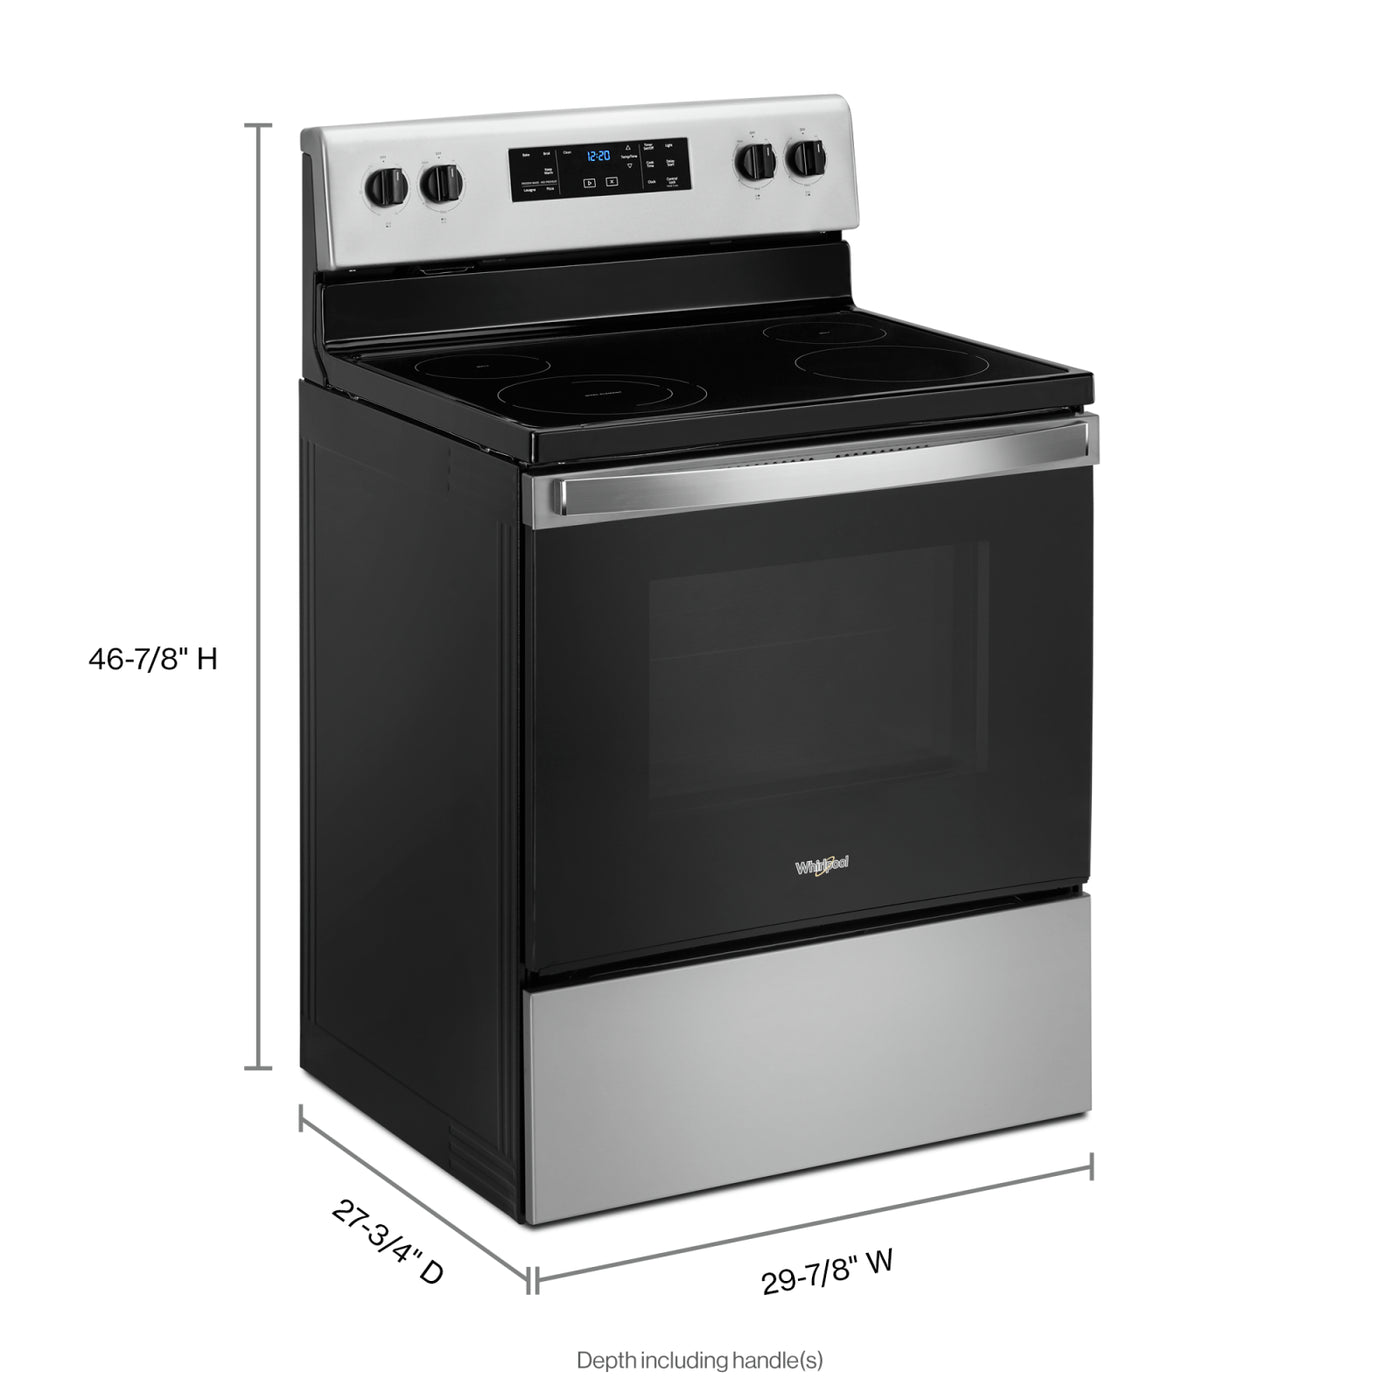 Whirlpool Stainless Steel Freestanding Electric Range (5.3 cu.ft.) - YWFE515S0JS